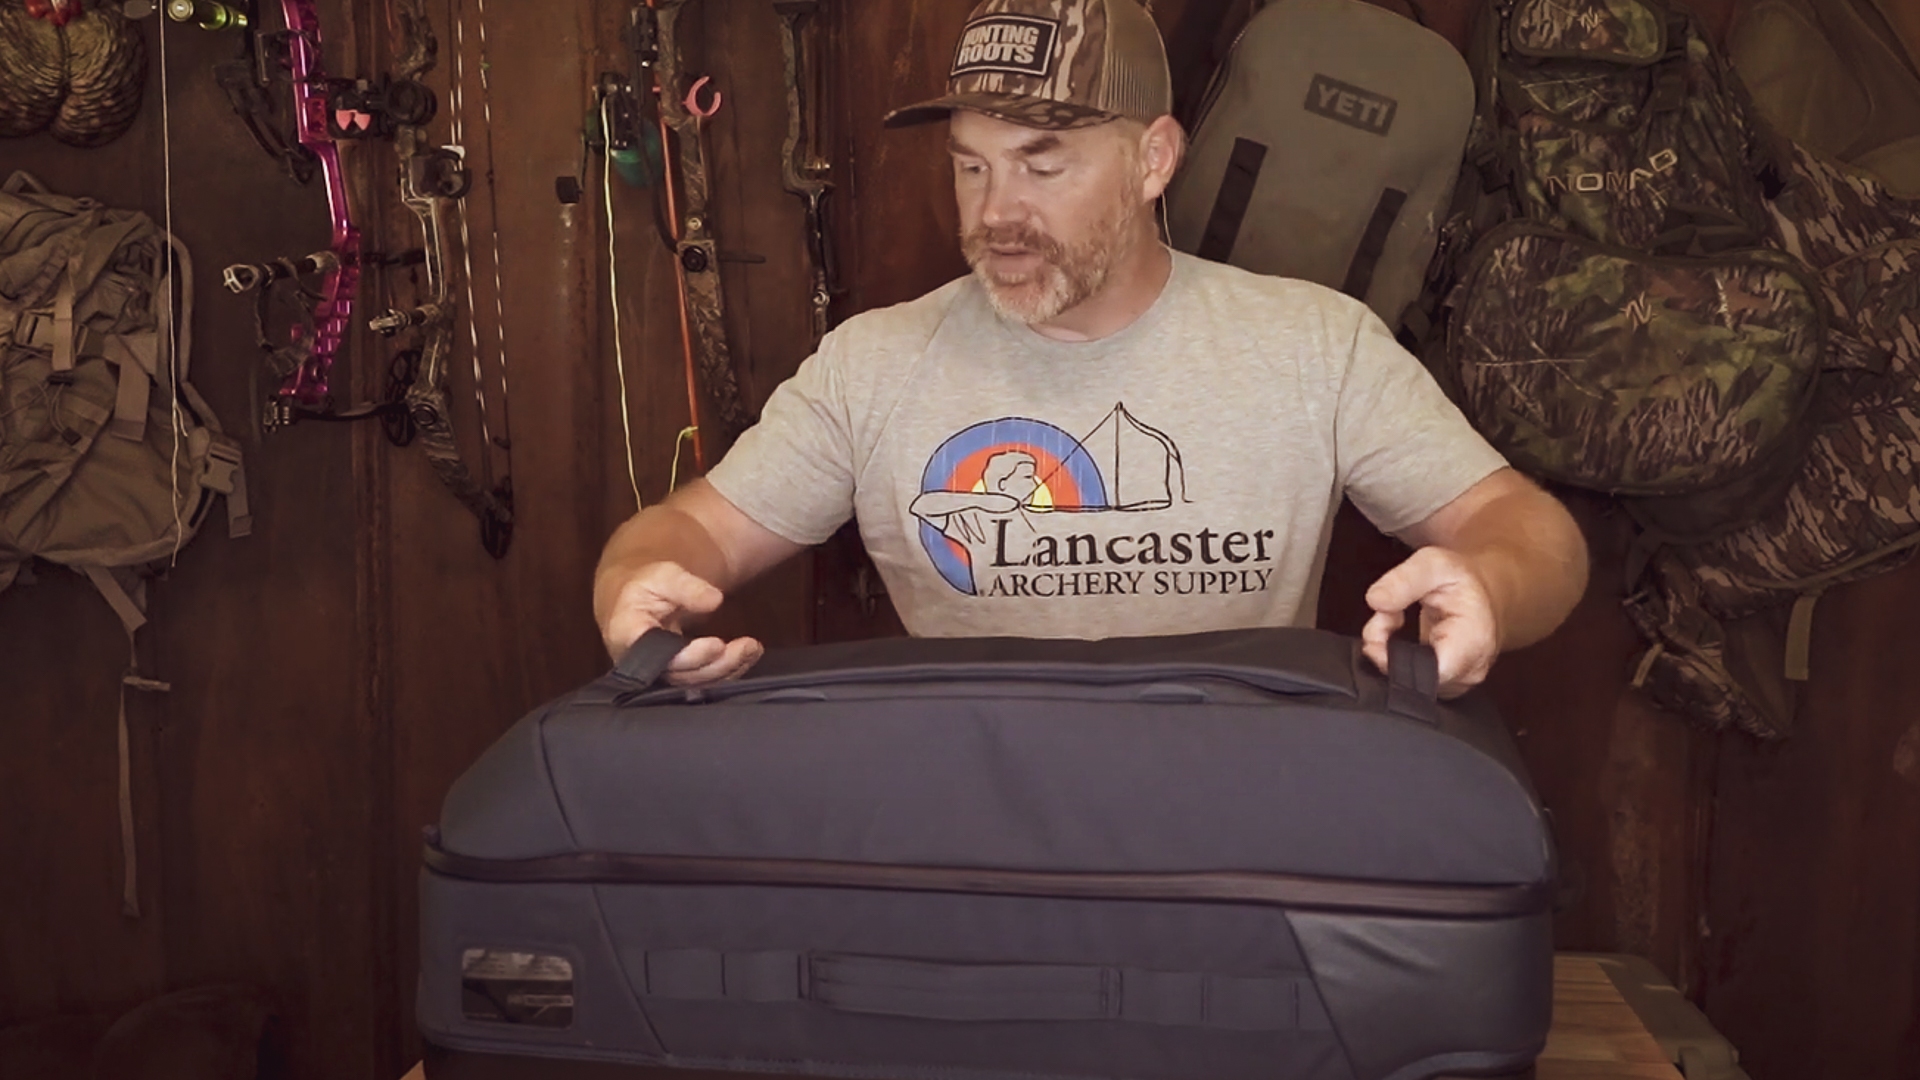 https://www.bowhunting.com/wp-content/uploads/2021/07/Yeti-Luggage-Feature.jpg